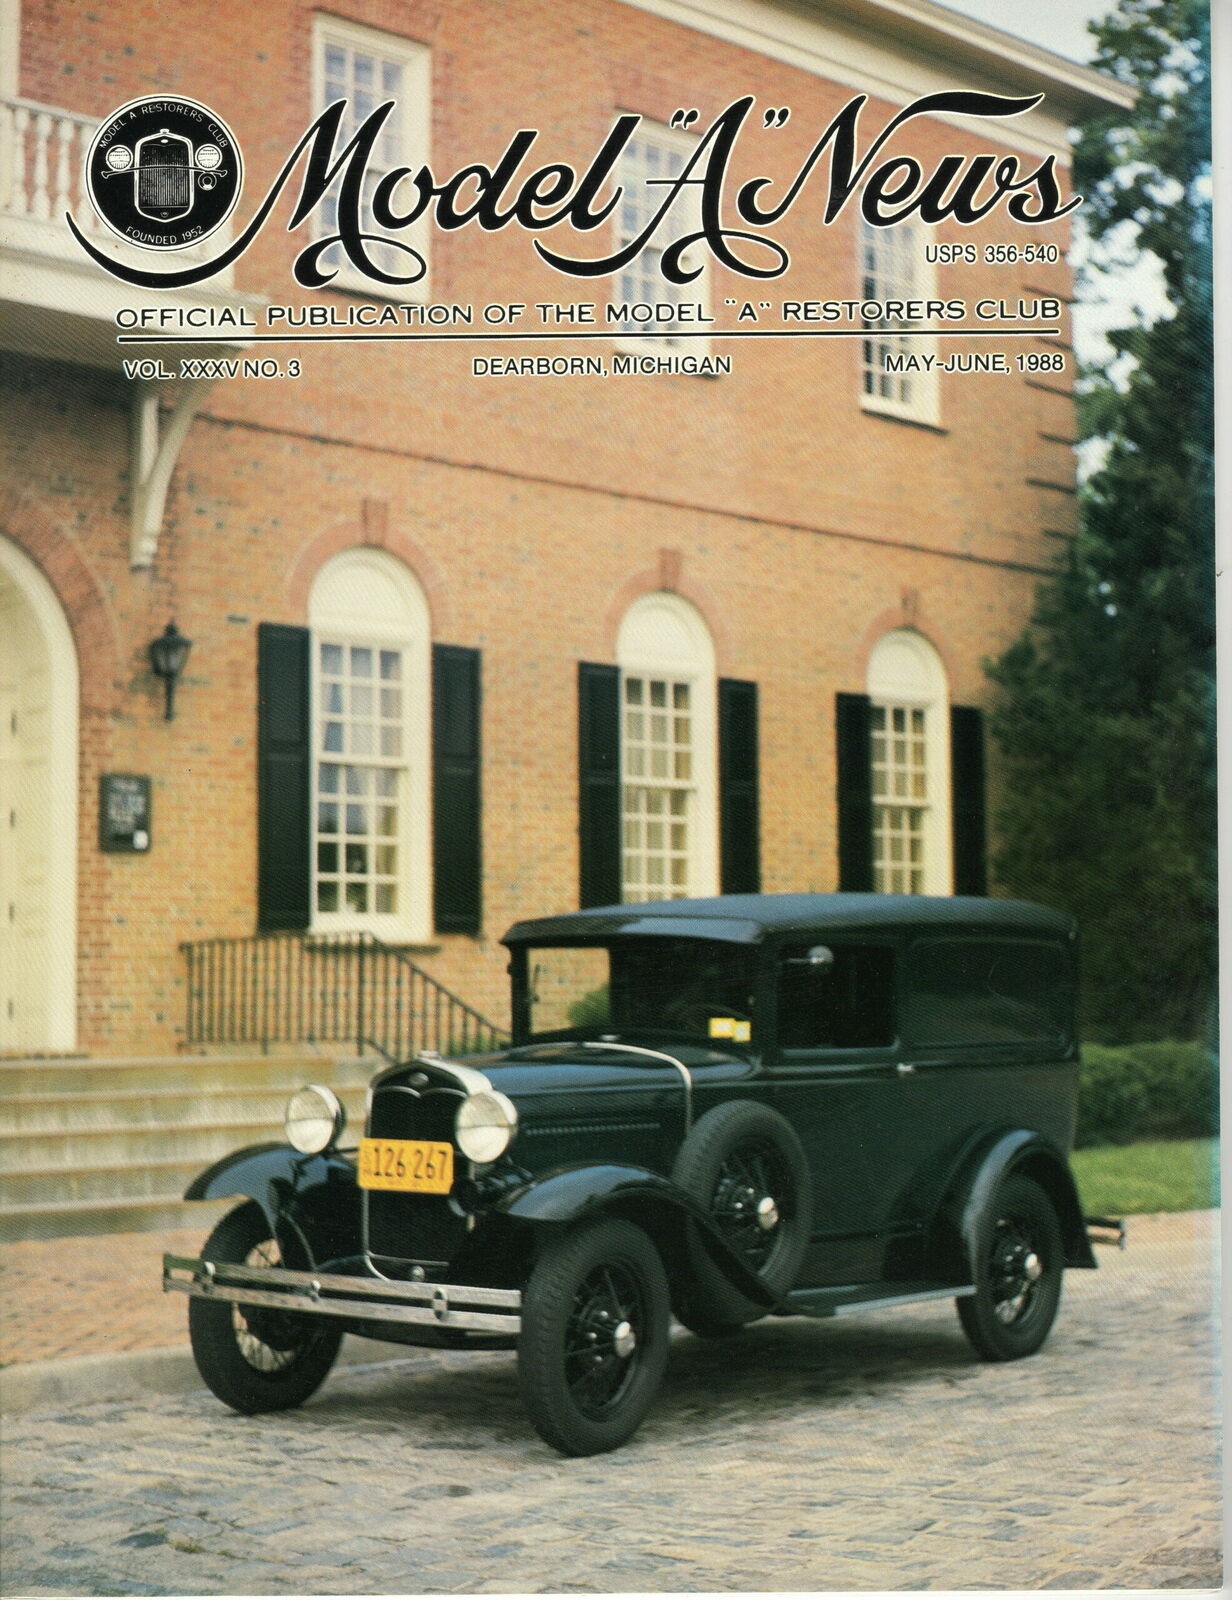 1931 DELUXE DELIVERY - MODEL “A” NEWS OFFICIAL PUBLICATION VOL.35 NO.3 1988 USA